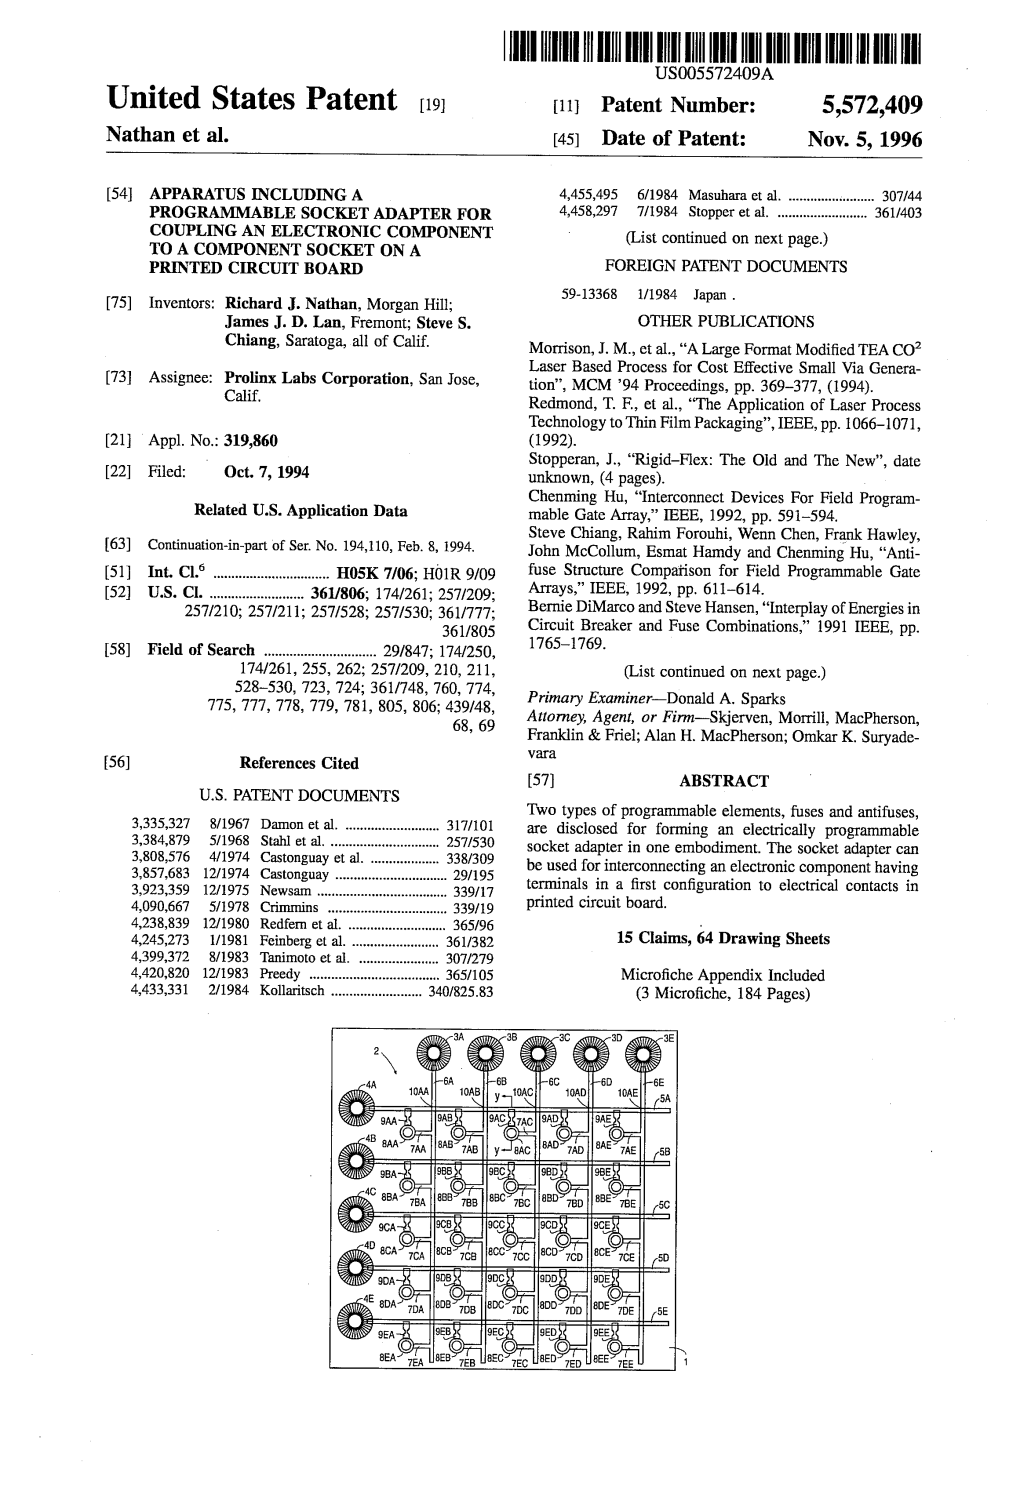 ||||III US005572409A United States Patent (19) 11 Patent Number: 5,572,409 Nathan Et Al